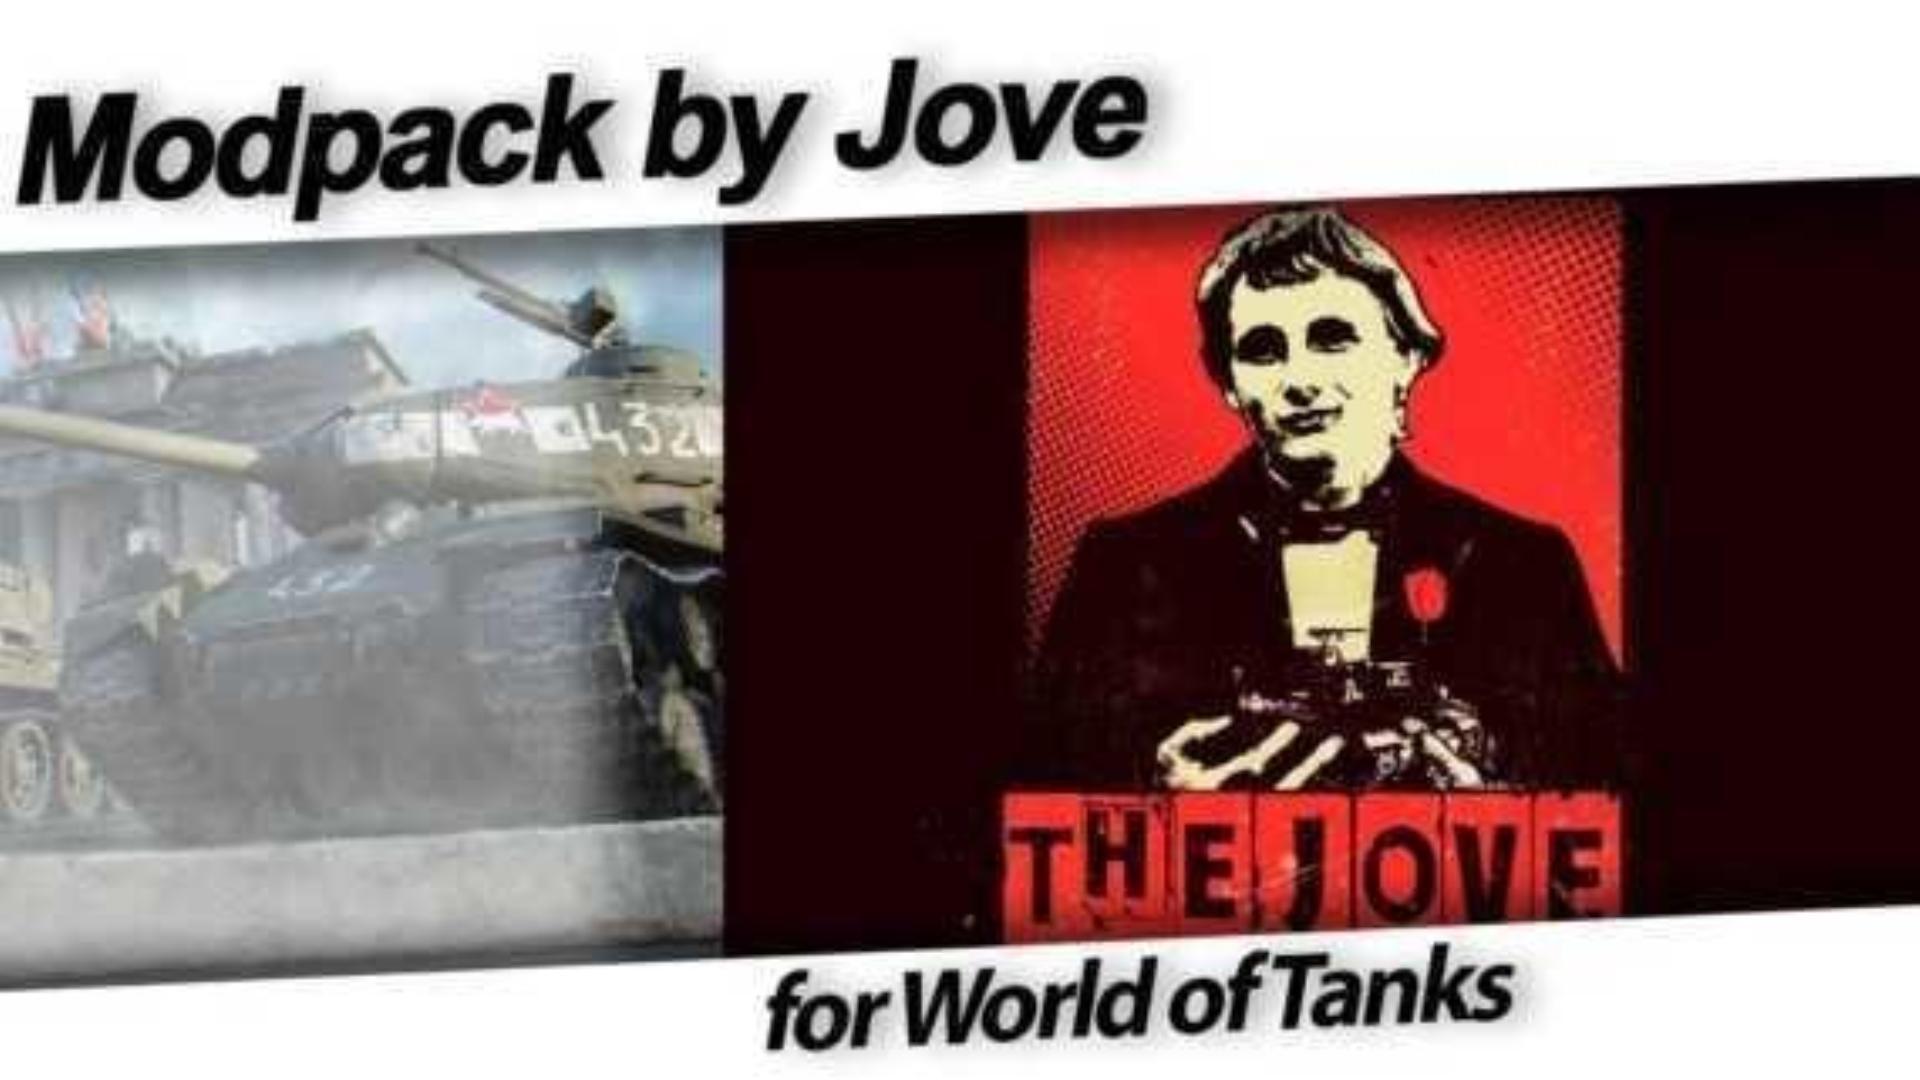 Download Jove S Modpack For Wot 1 9 0 3 Via The Direct Link